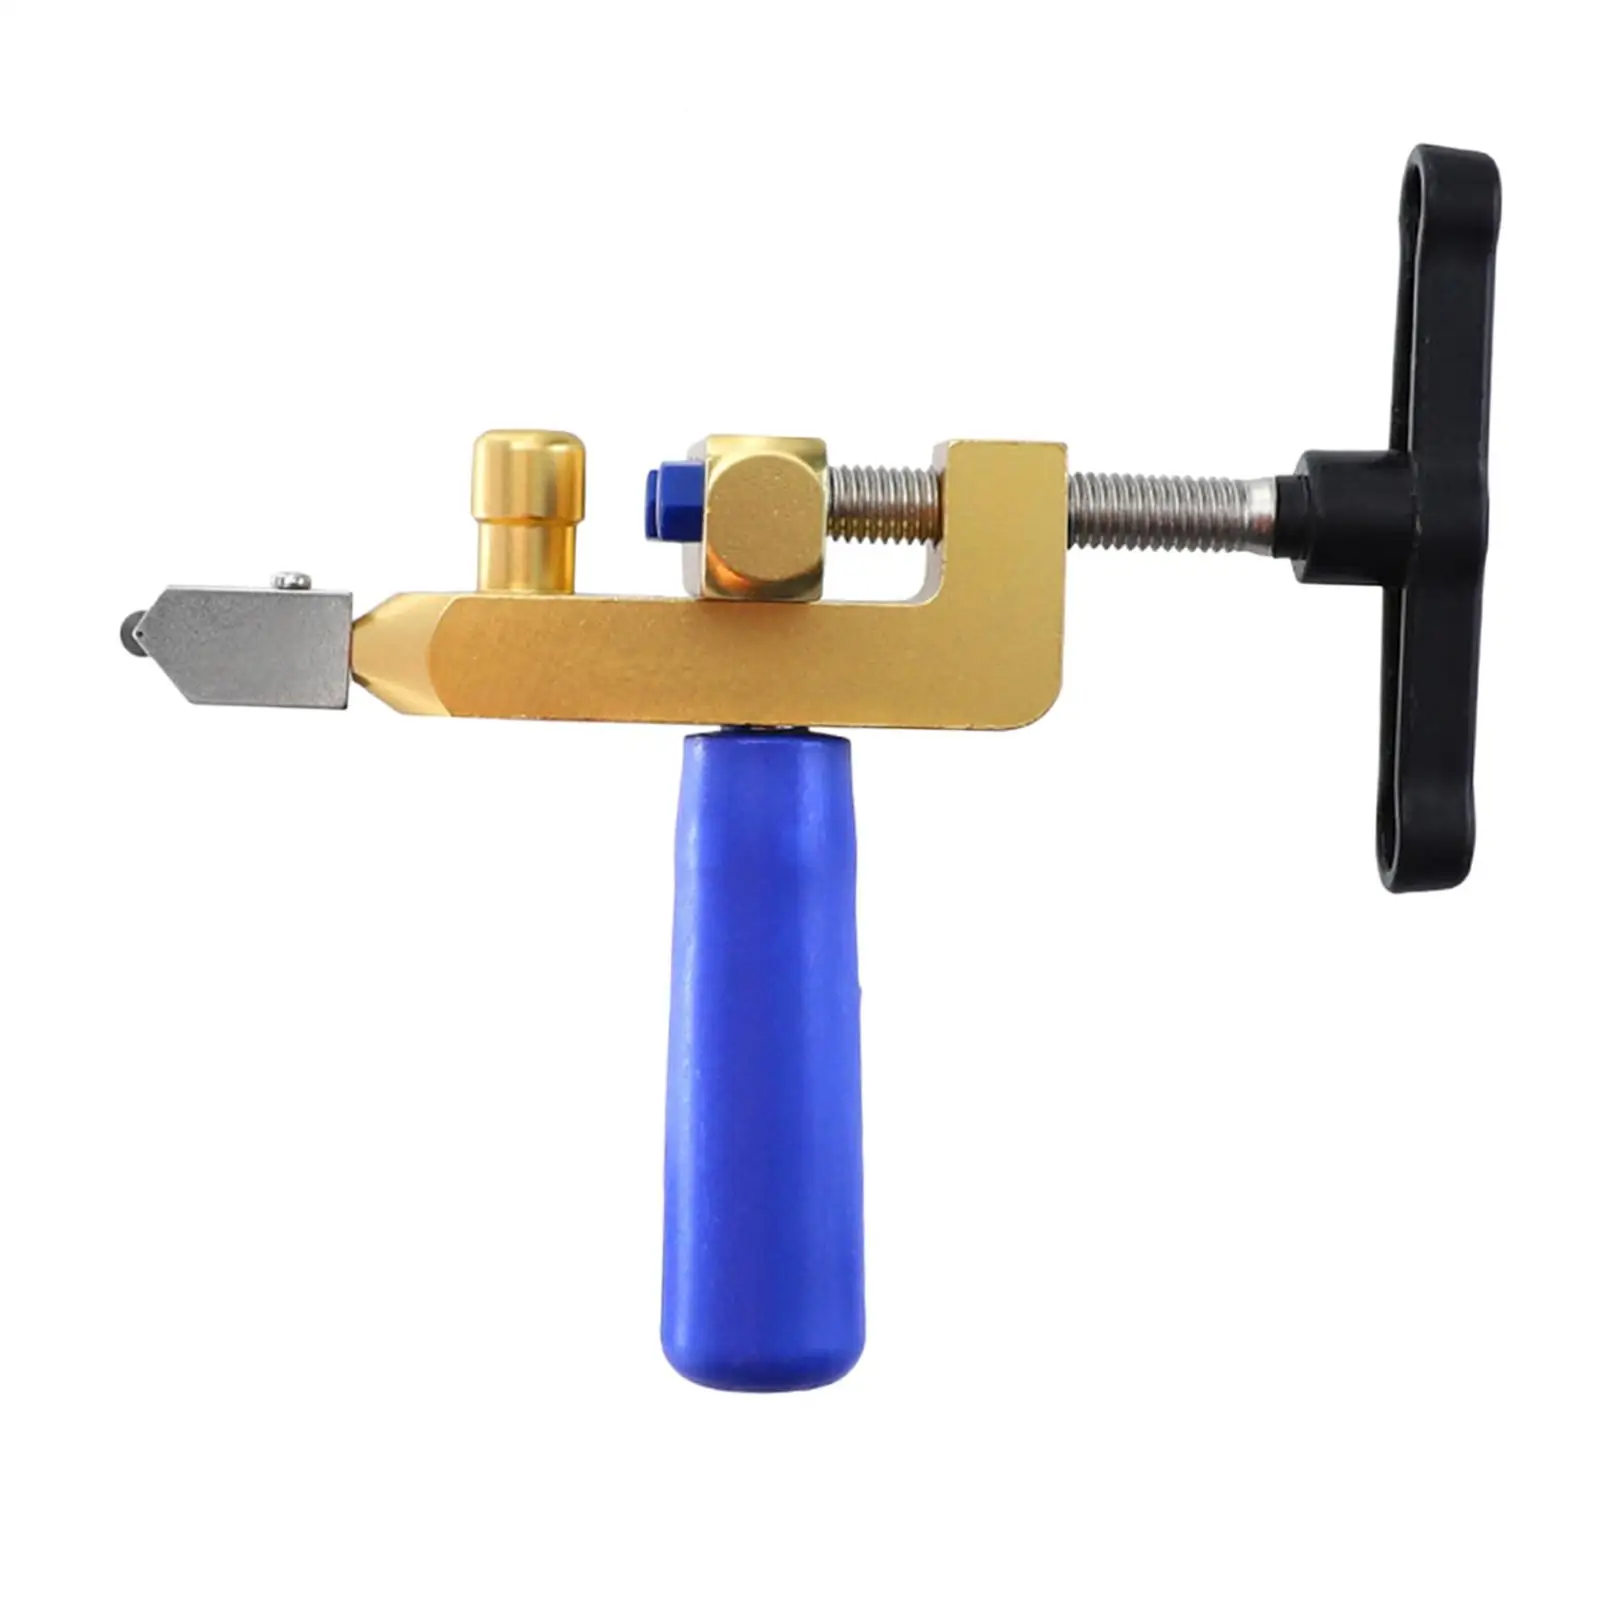 Professional Carbide Alloy Steel Glass Cutter Tool with Range 3-15mm Professional Cutter for Thick Glass and Tiles